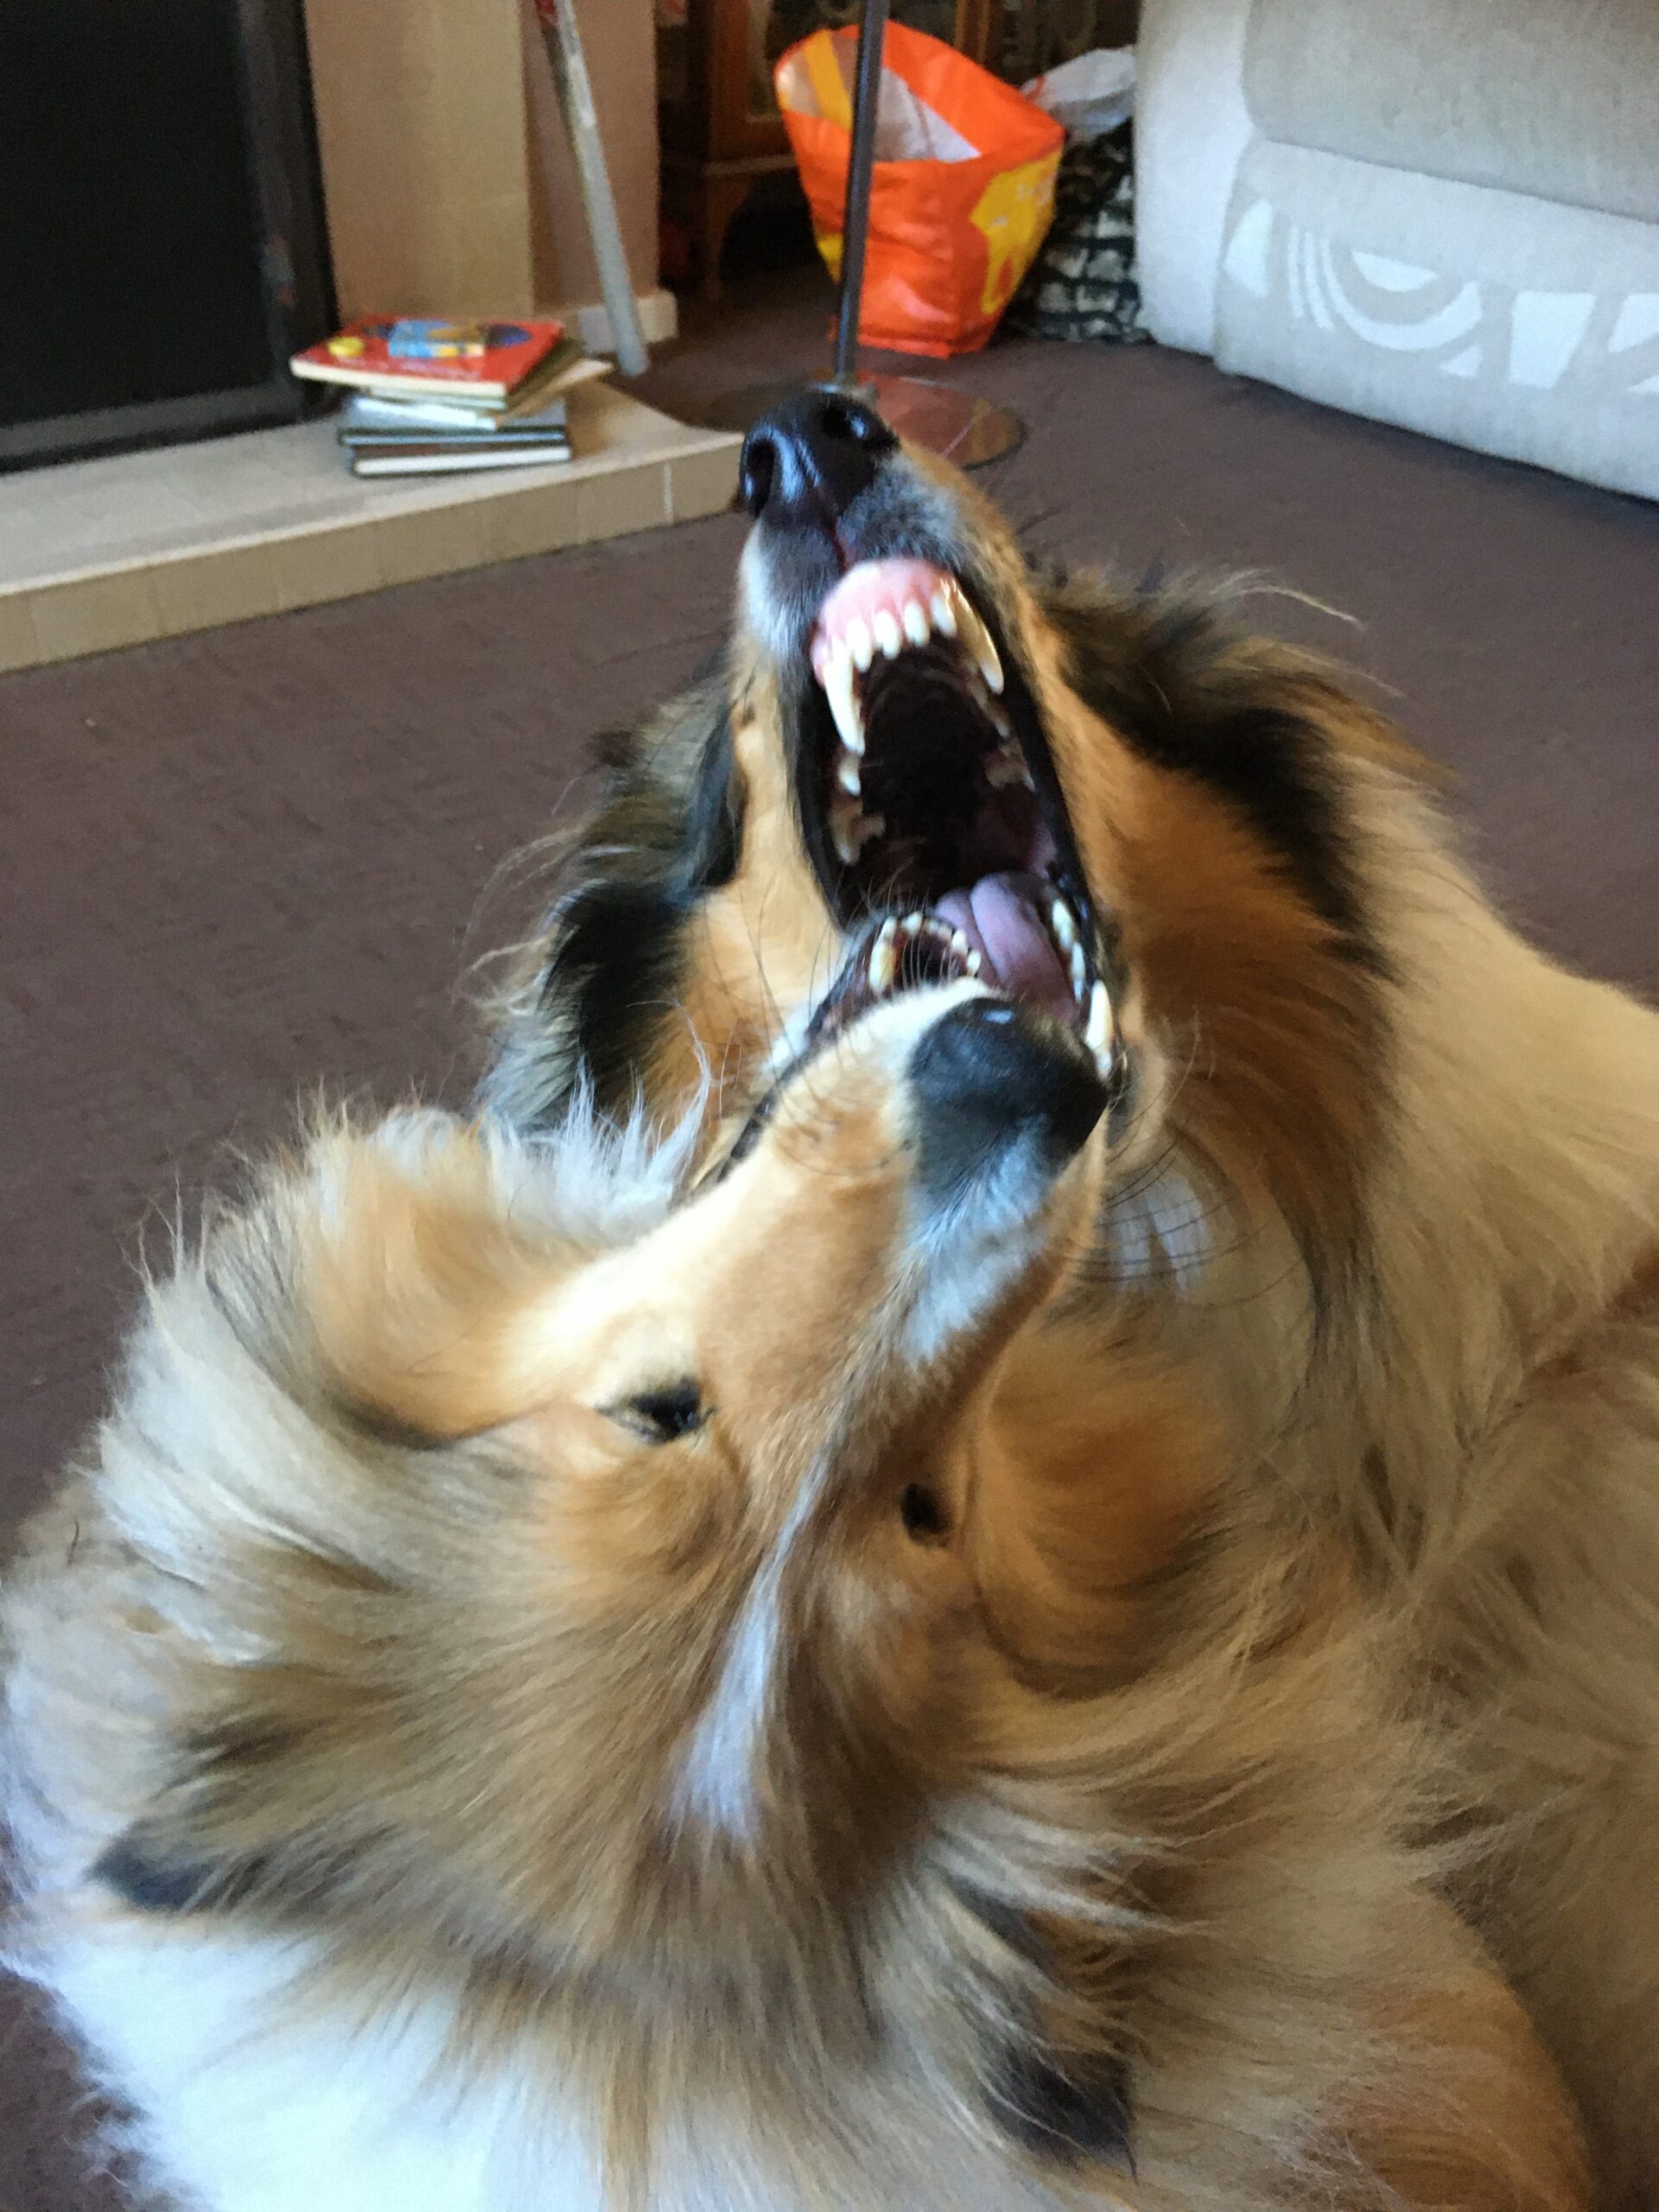 Po, a rough collie dog, has his mouth wide open showing his impressive set of teeth. Sandy, another rough collie, also has her mouth open showing her teeth. They are waving their teeth together in what is viewed as typical collie play.